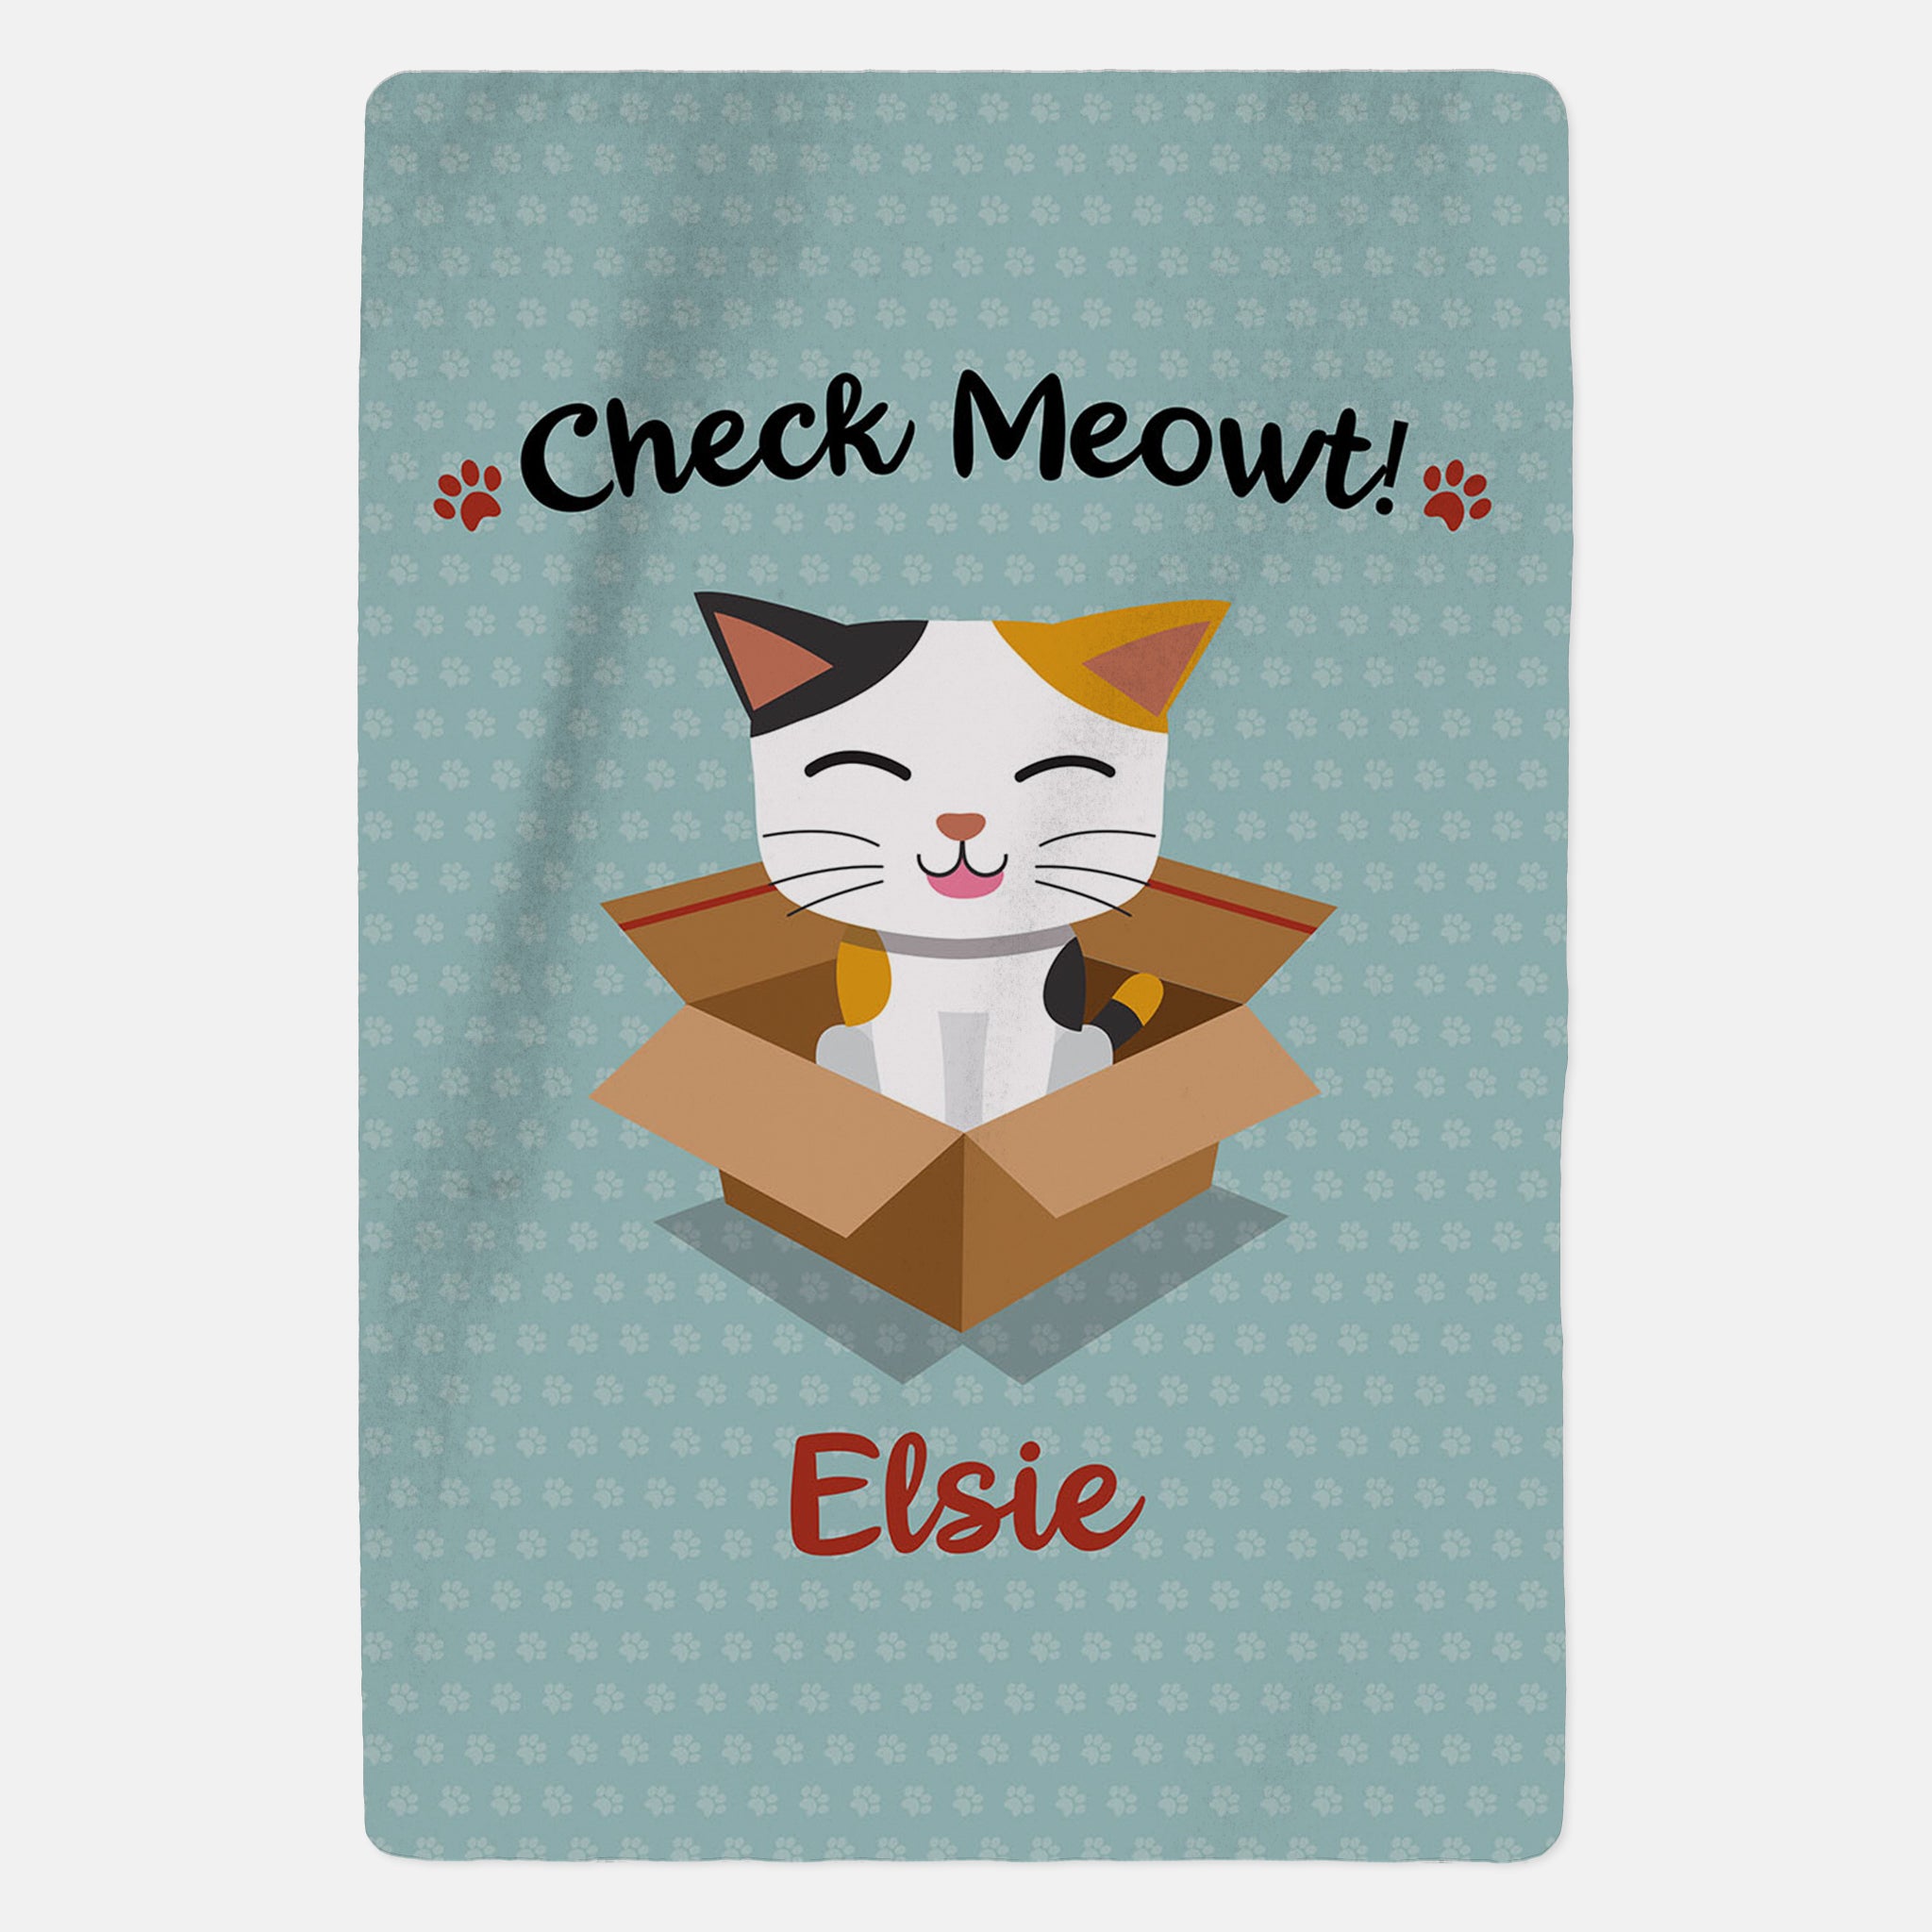 Personalised Tabby Cat Blanket - Check Meowt - Blue